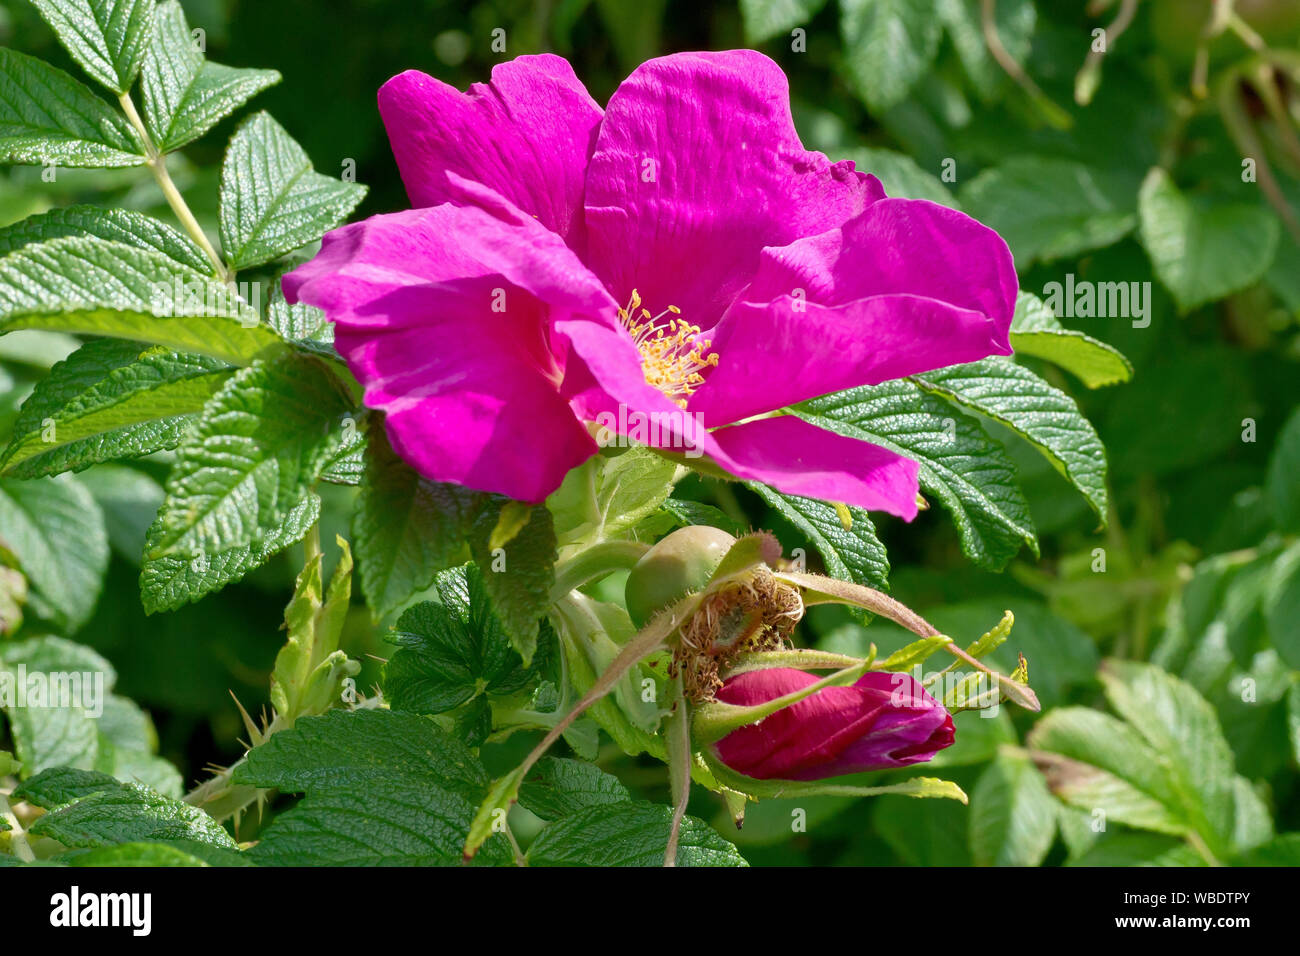 Wild Rose (rosa rugosa rubra), close up showing the flower, a bud and a developing rose hip or seed pod. Stock Photo